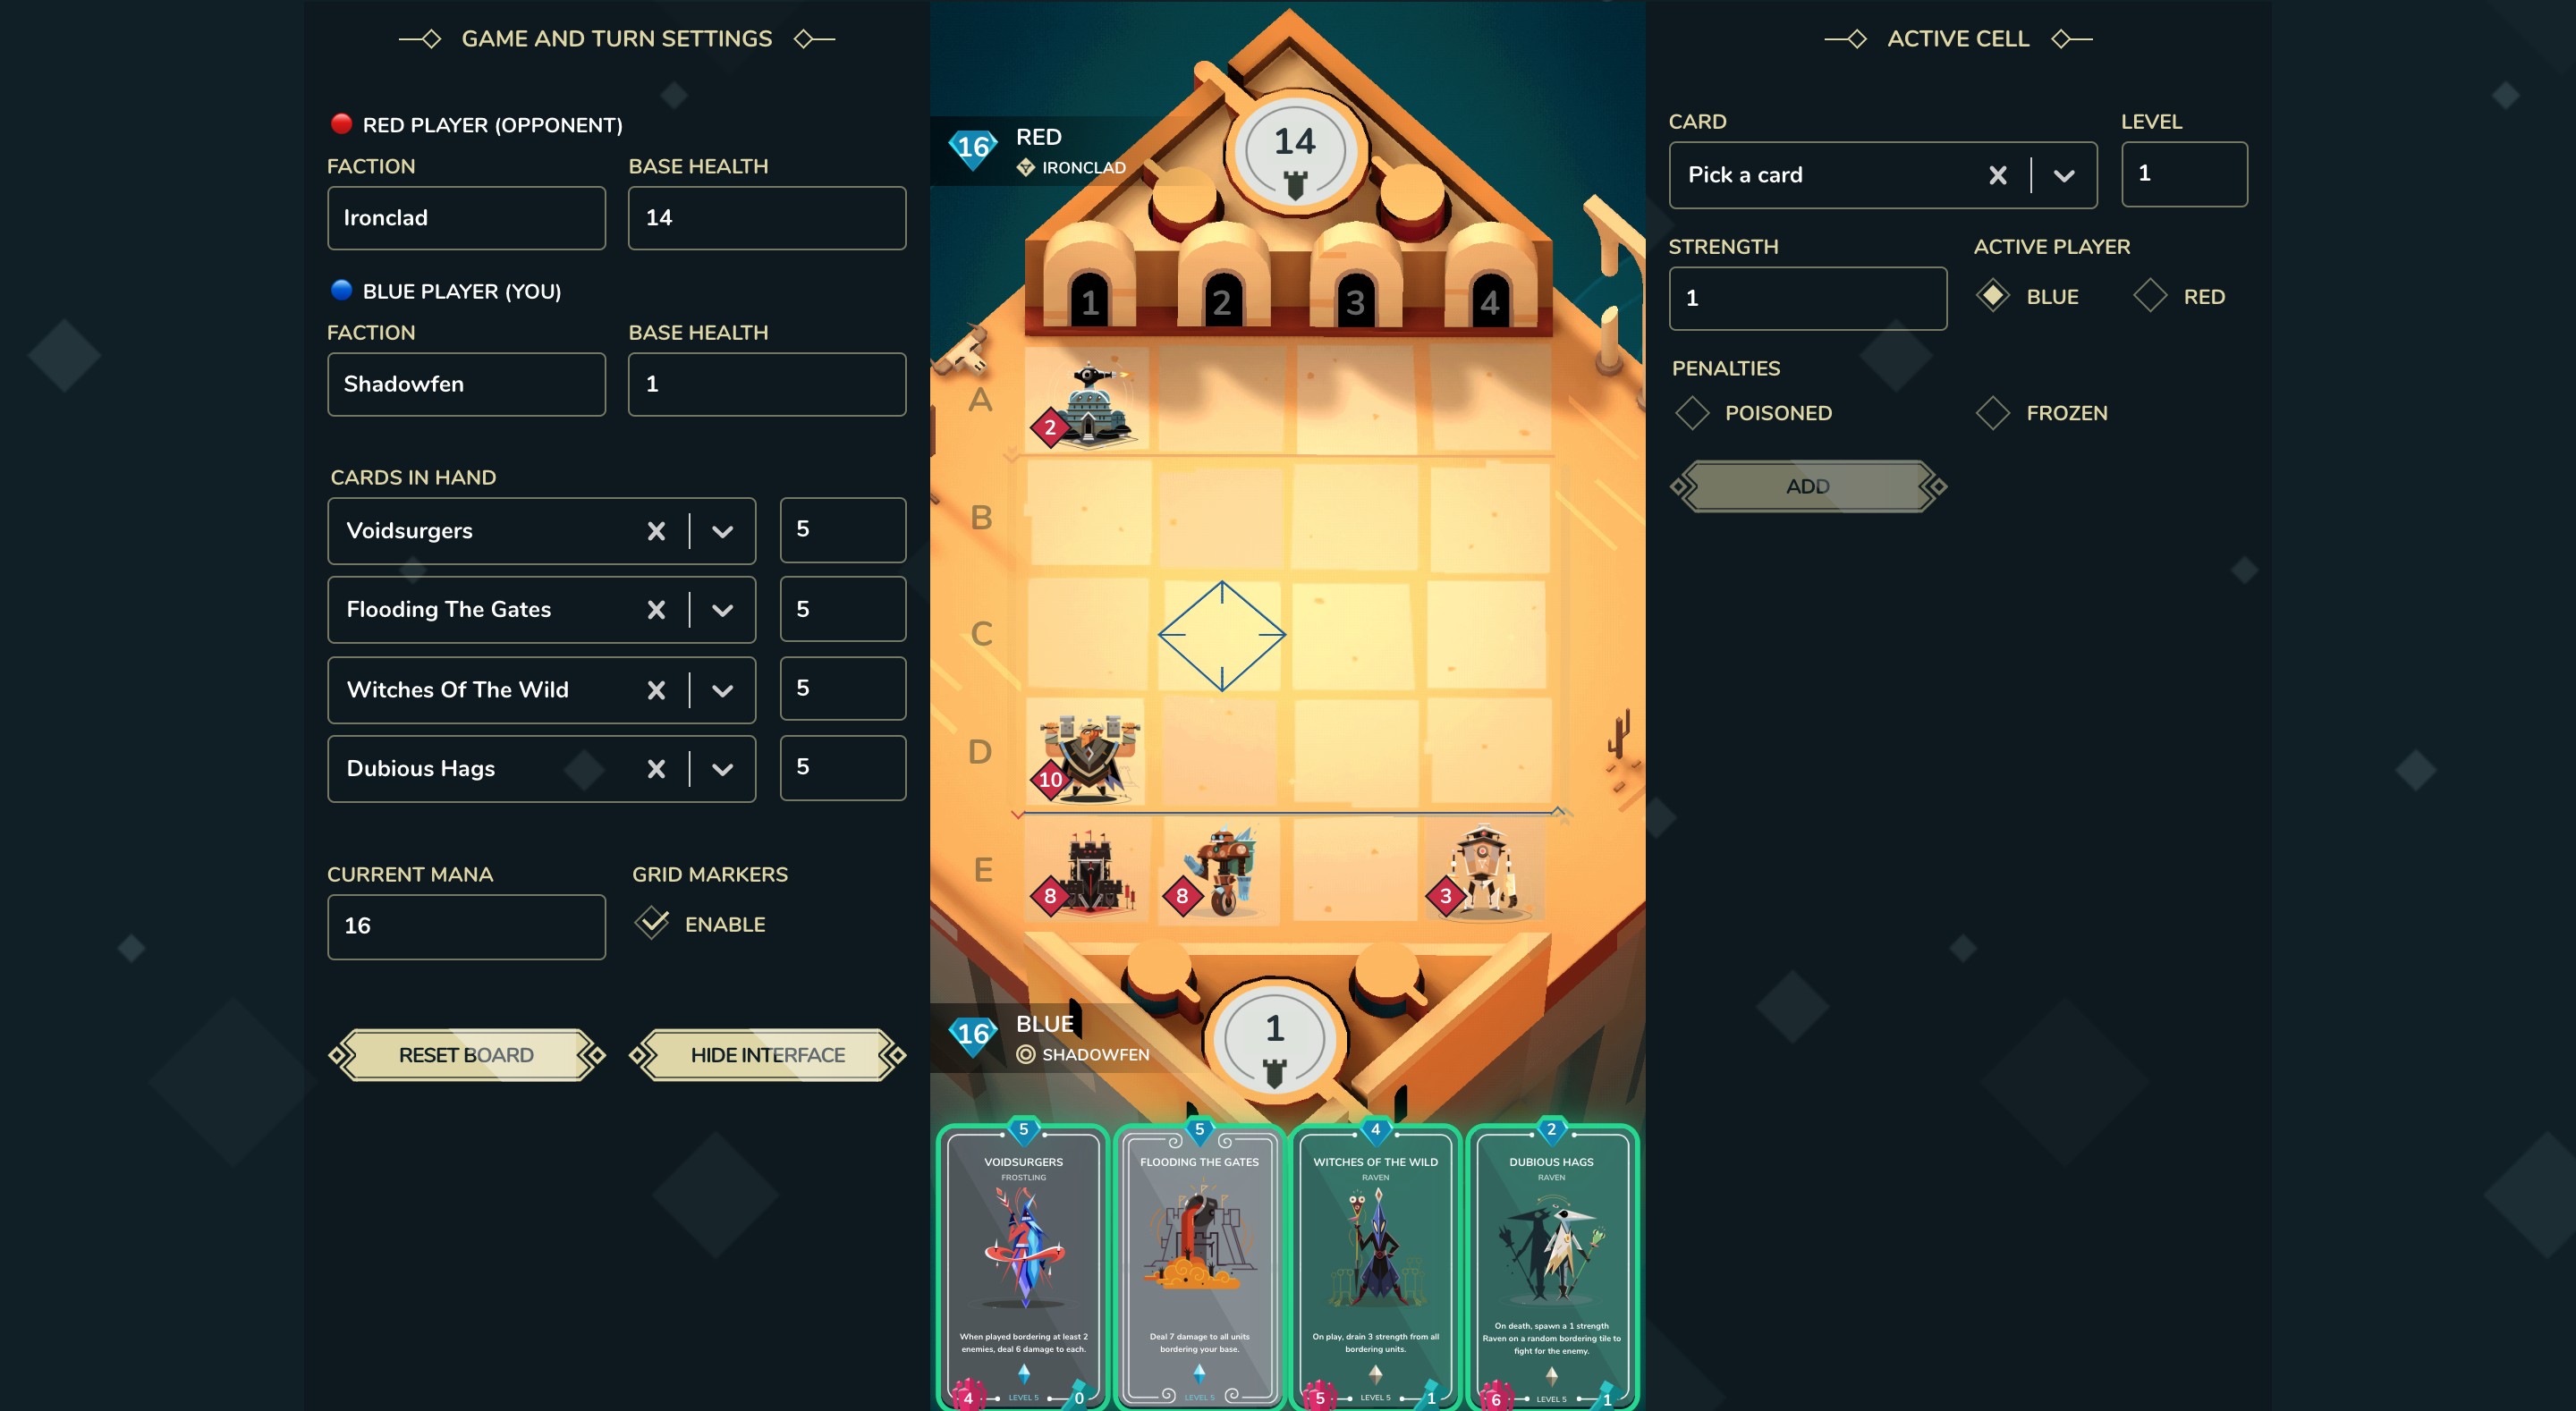 An improved version of the battle sim showcasing more options, cards in hand, import and export and a refined interface.